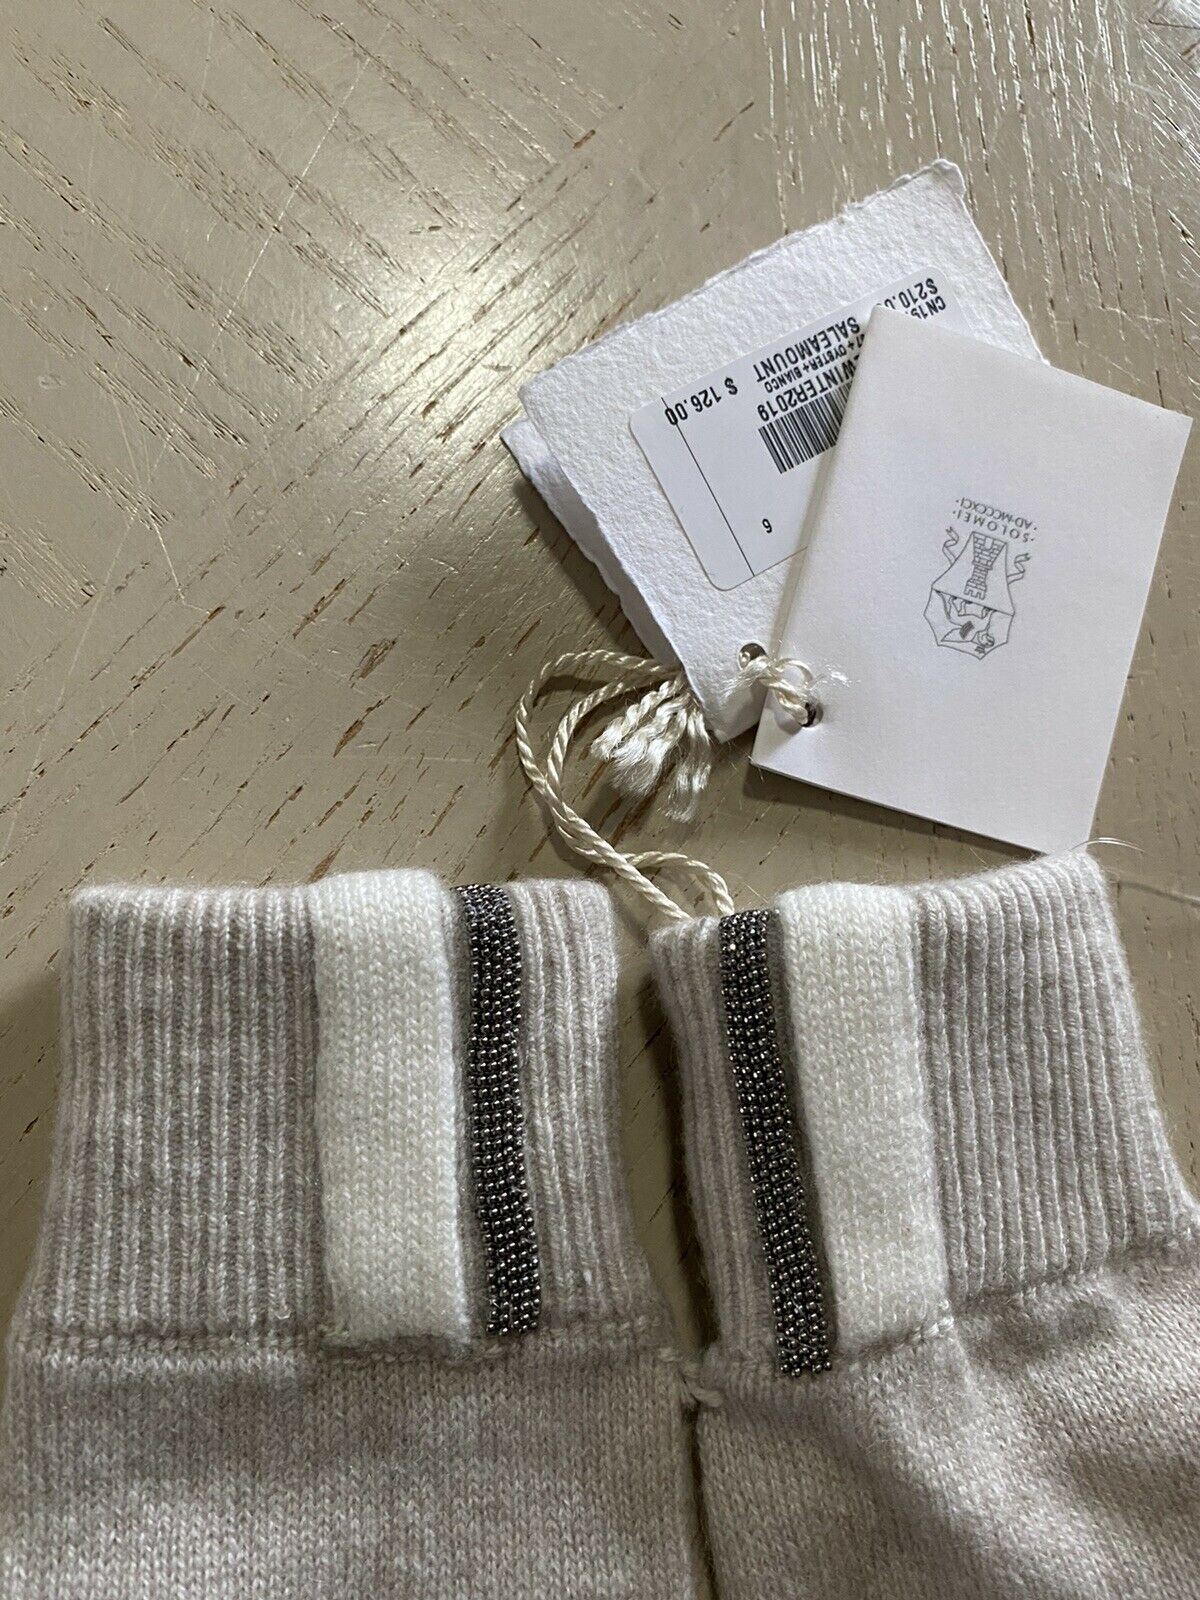 NWT Brunello Cucinelli Girl’s Cashmere Gloves Ivory Size 6 Italy